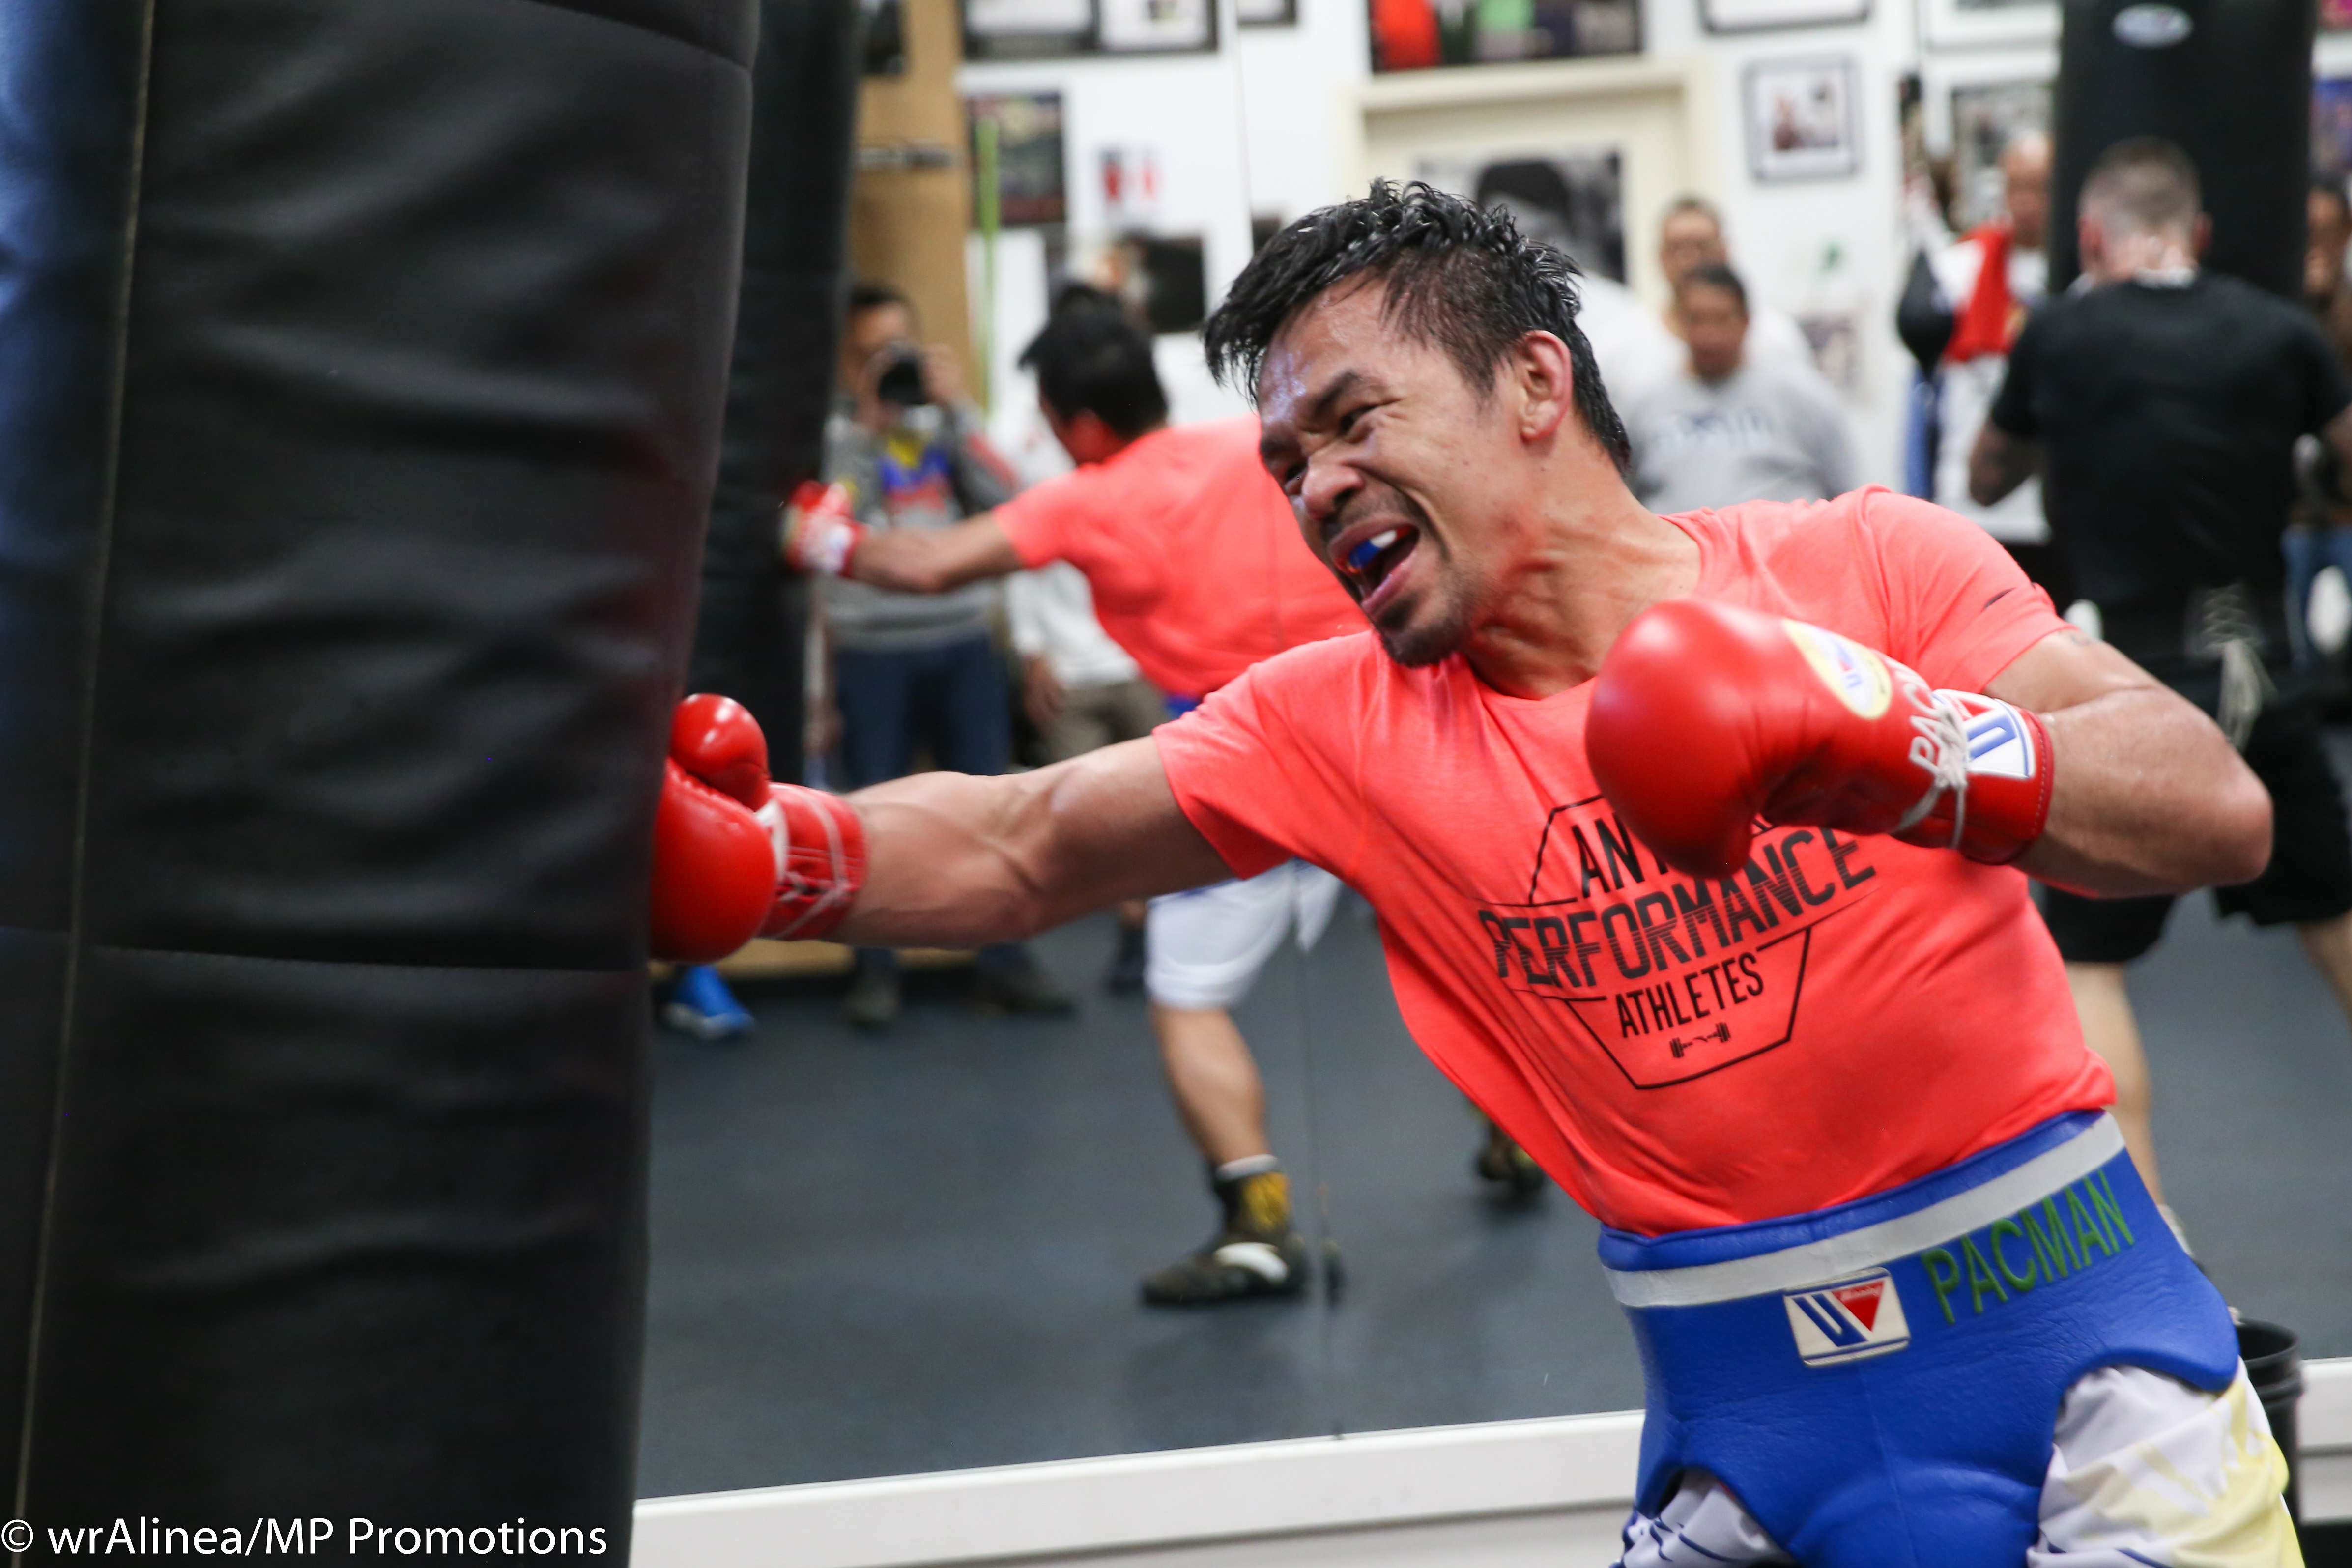 Pacquiao takes another swipe at Mayweather over exhibition match KO | Inquirer Sports